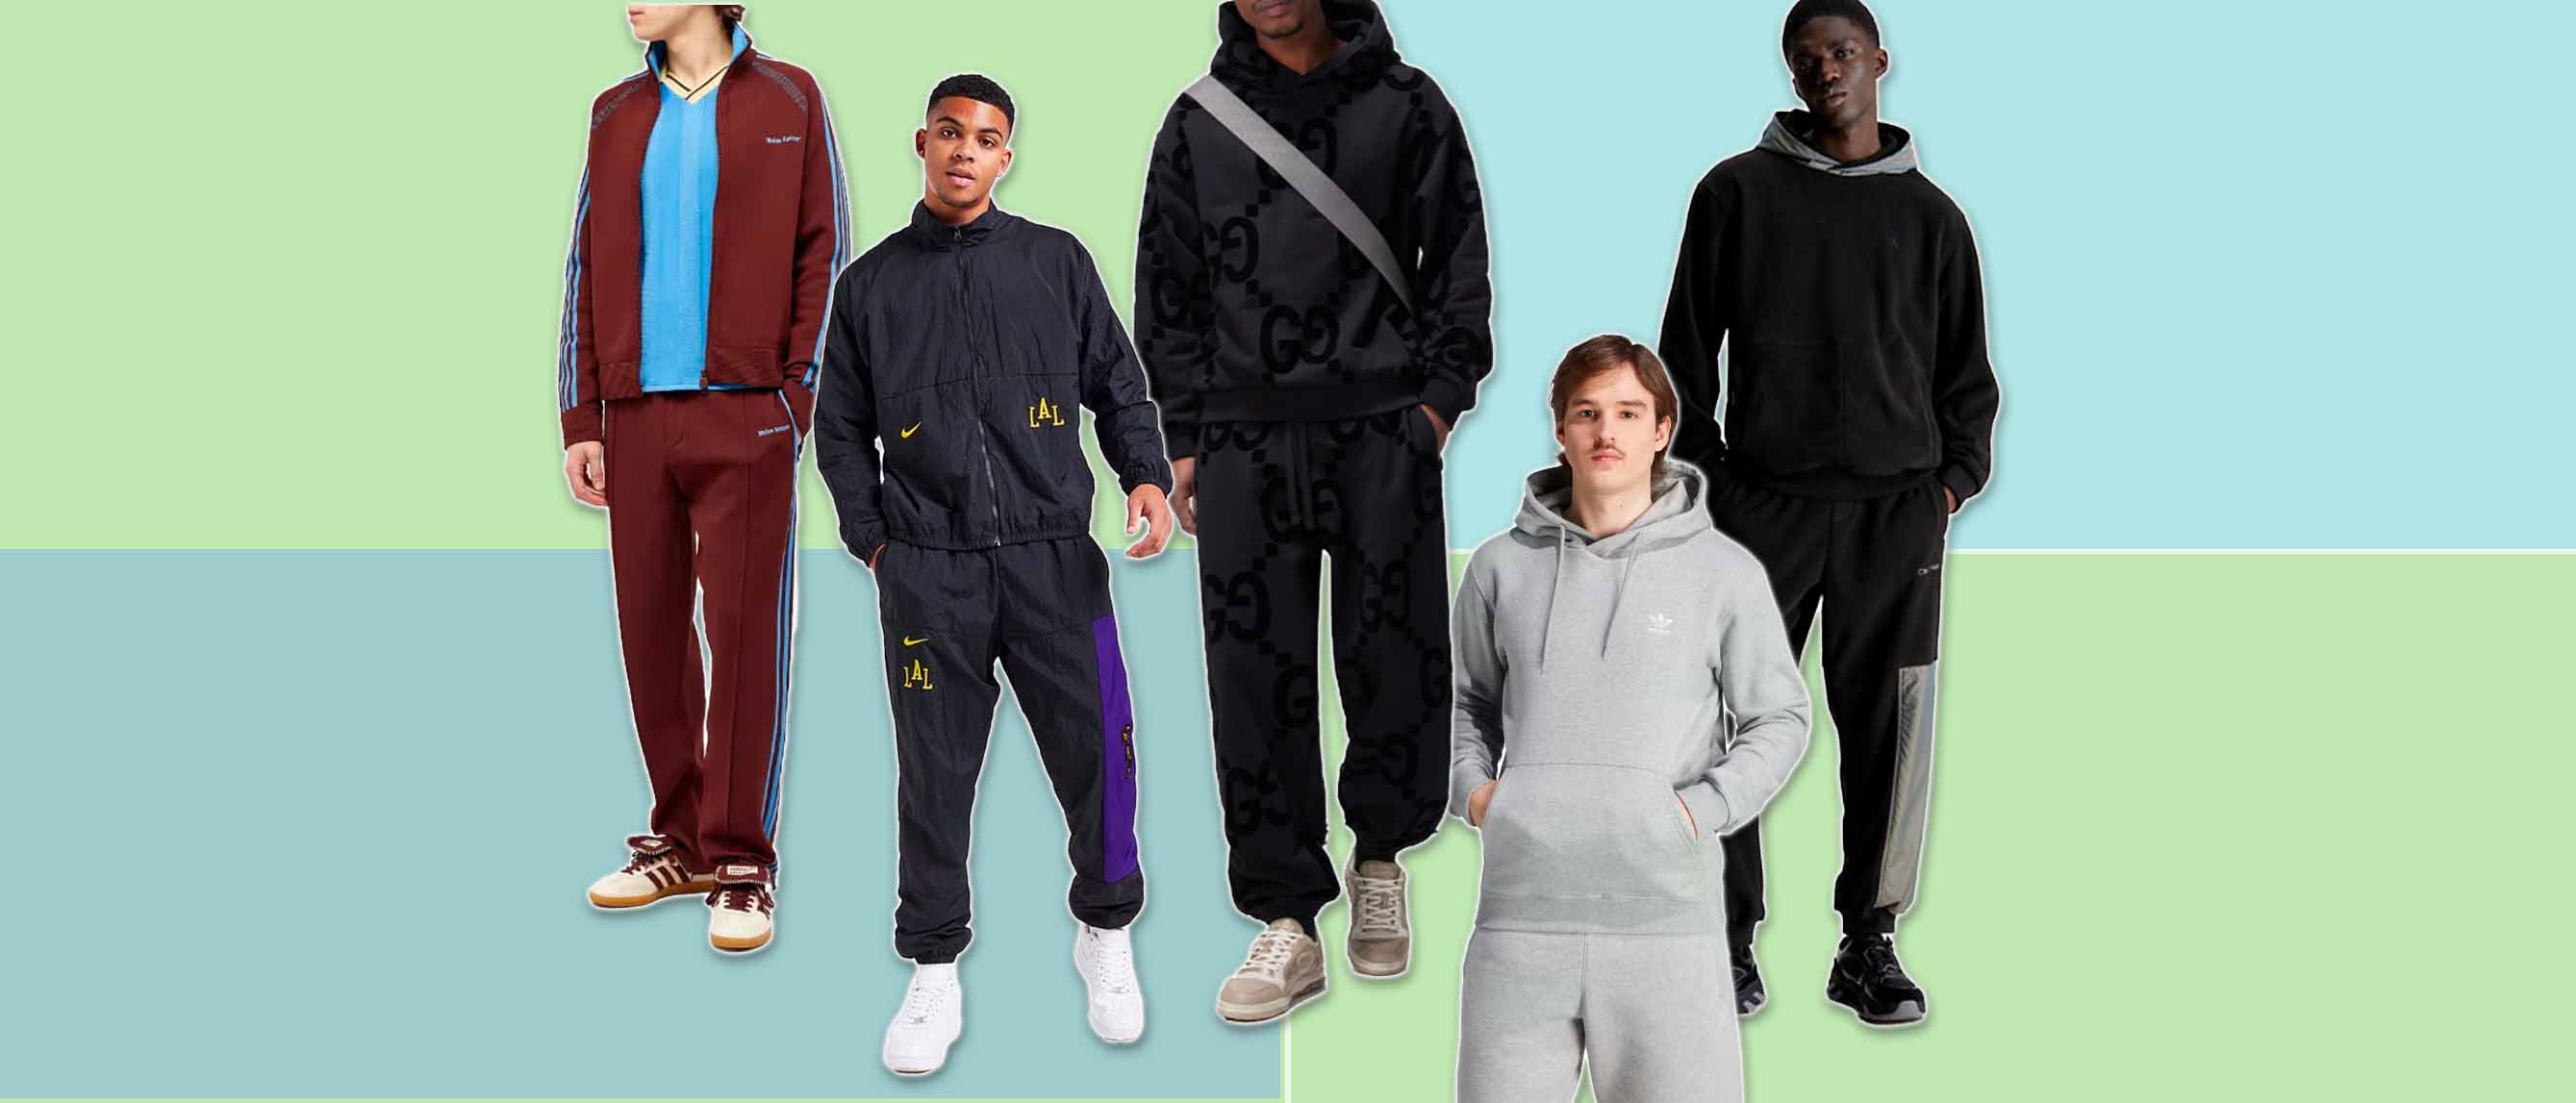 This season's best 9 tracksuits for men - Daily Mail